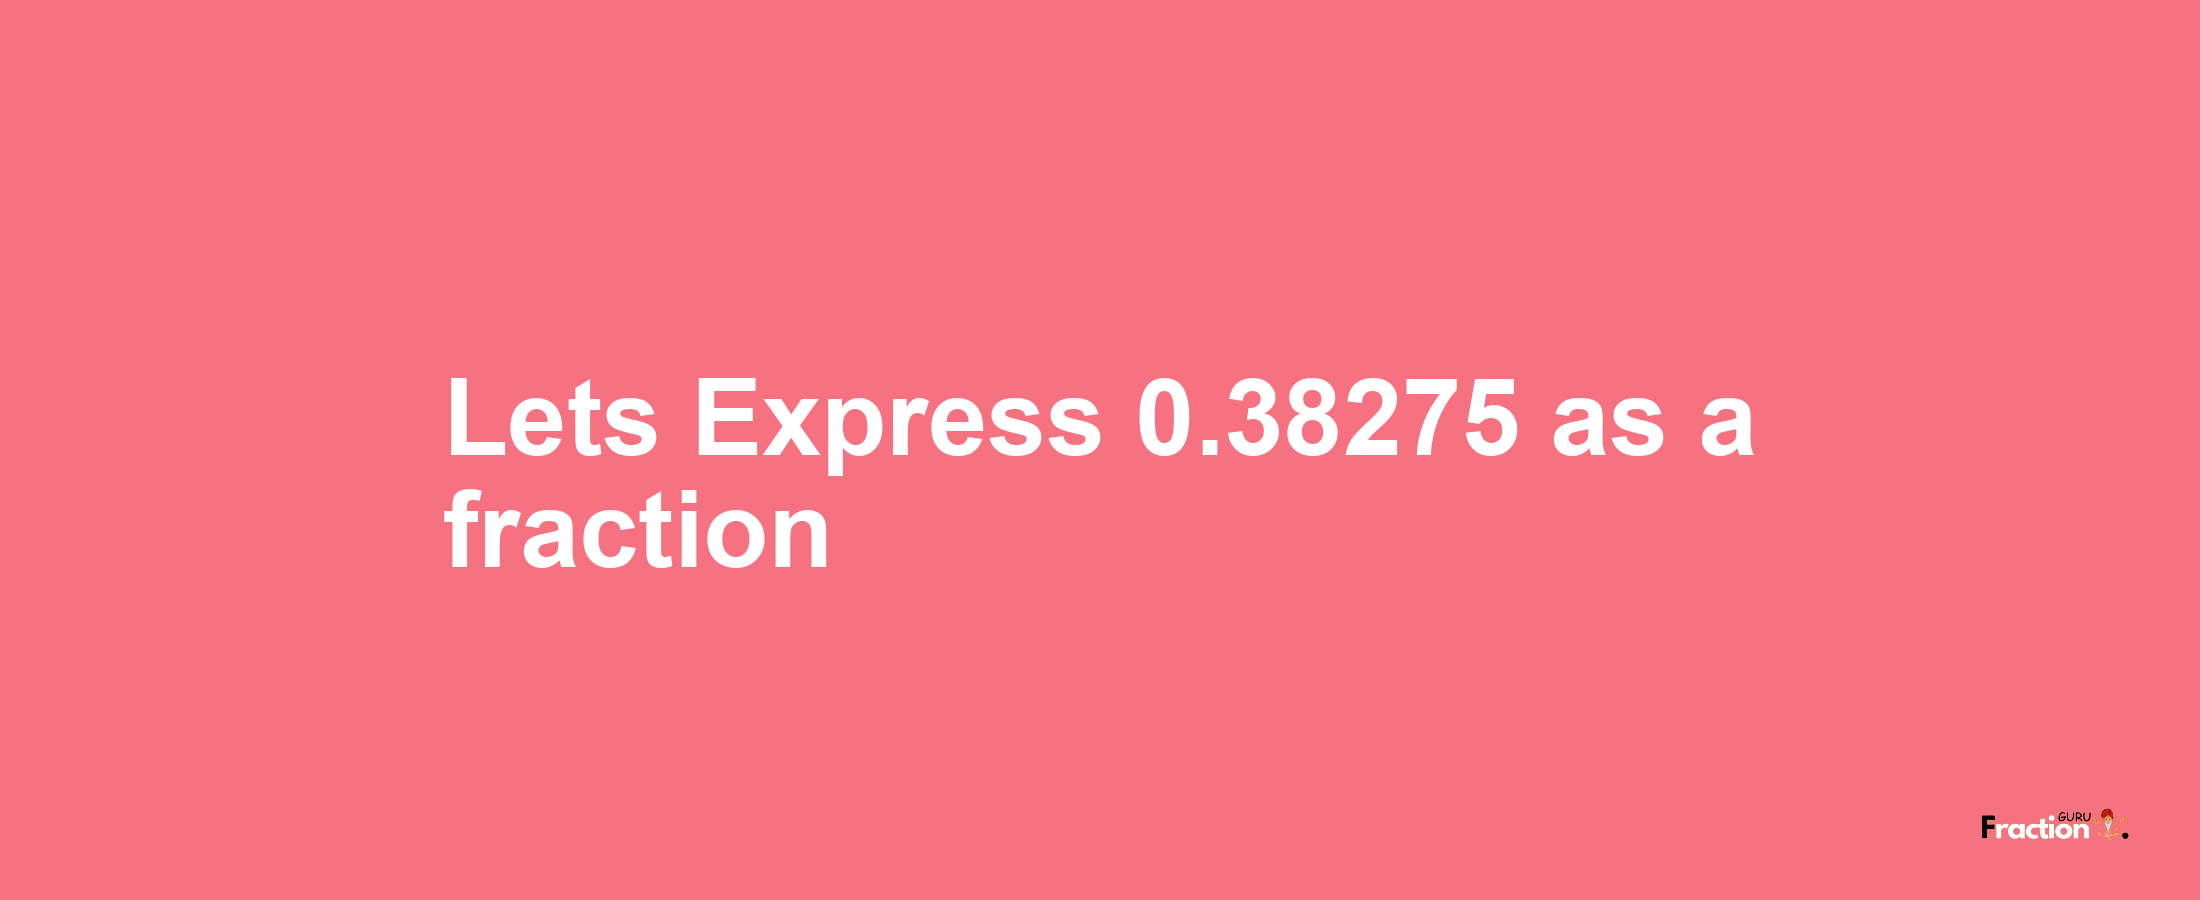 Lets Express 0.38275 as afraction